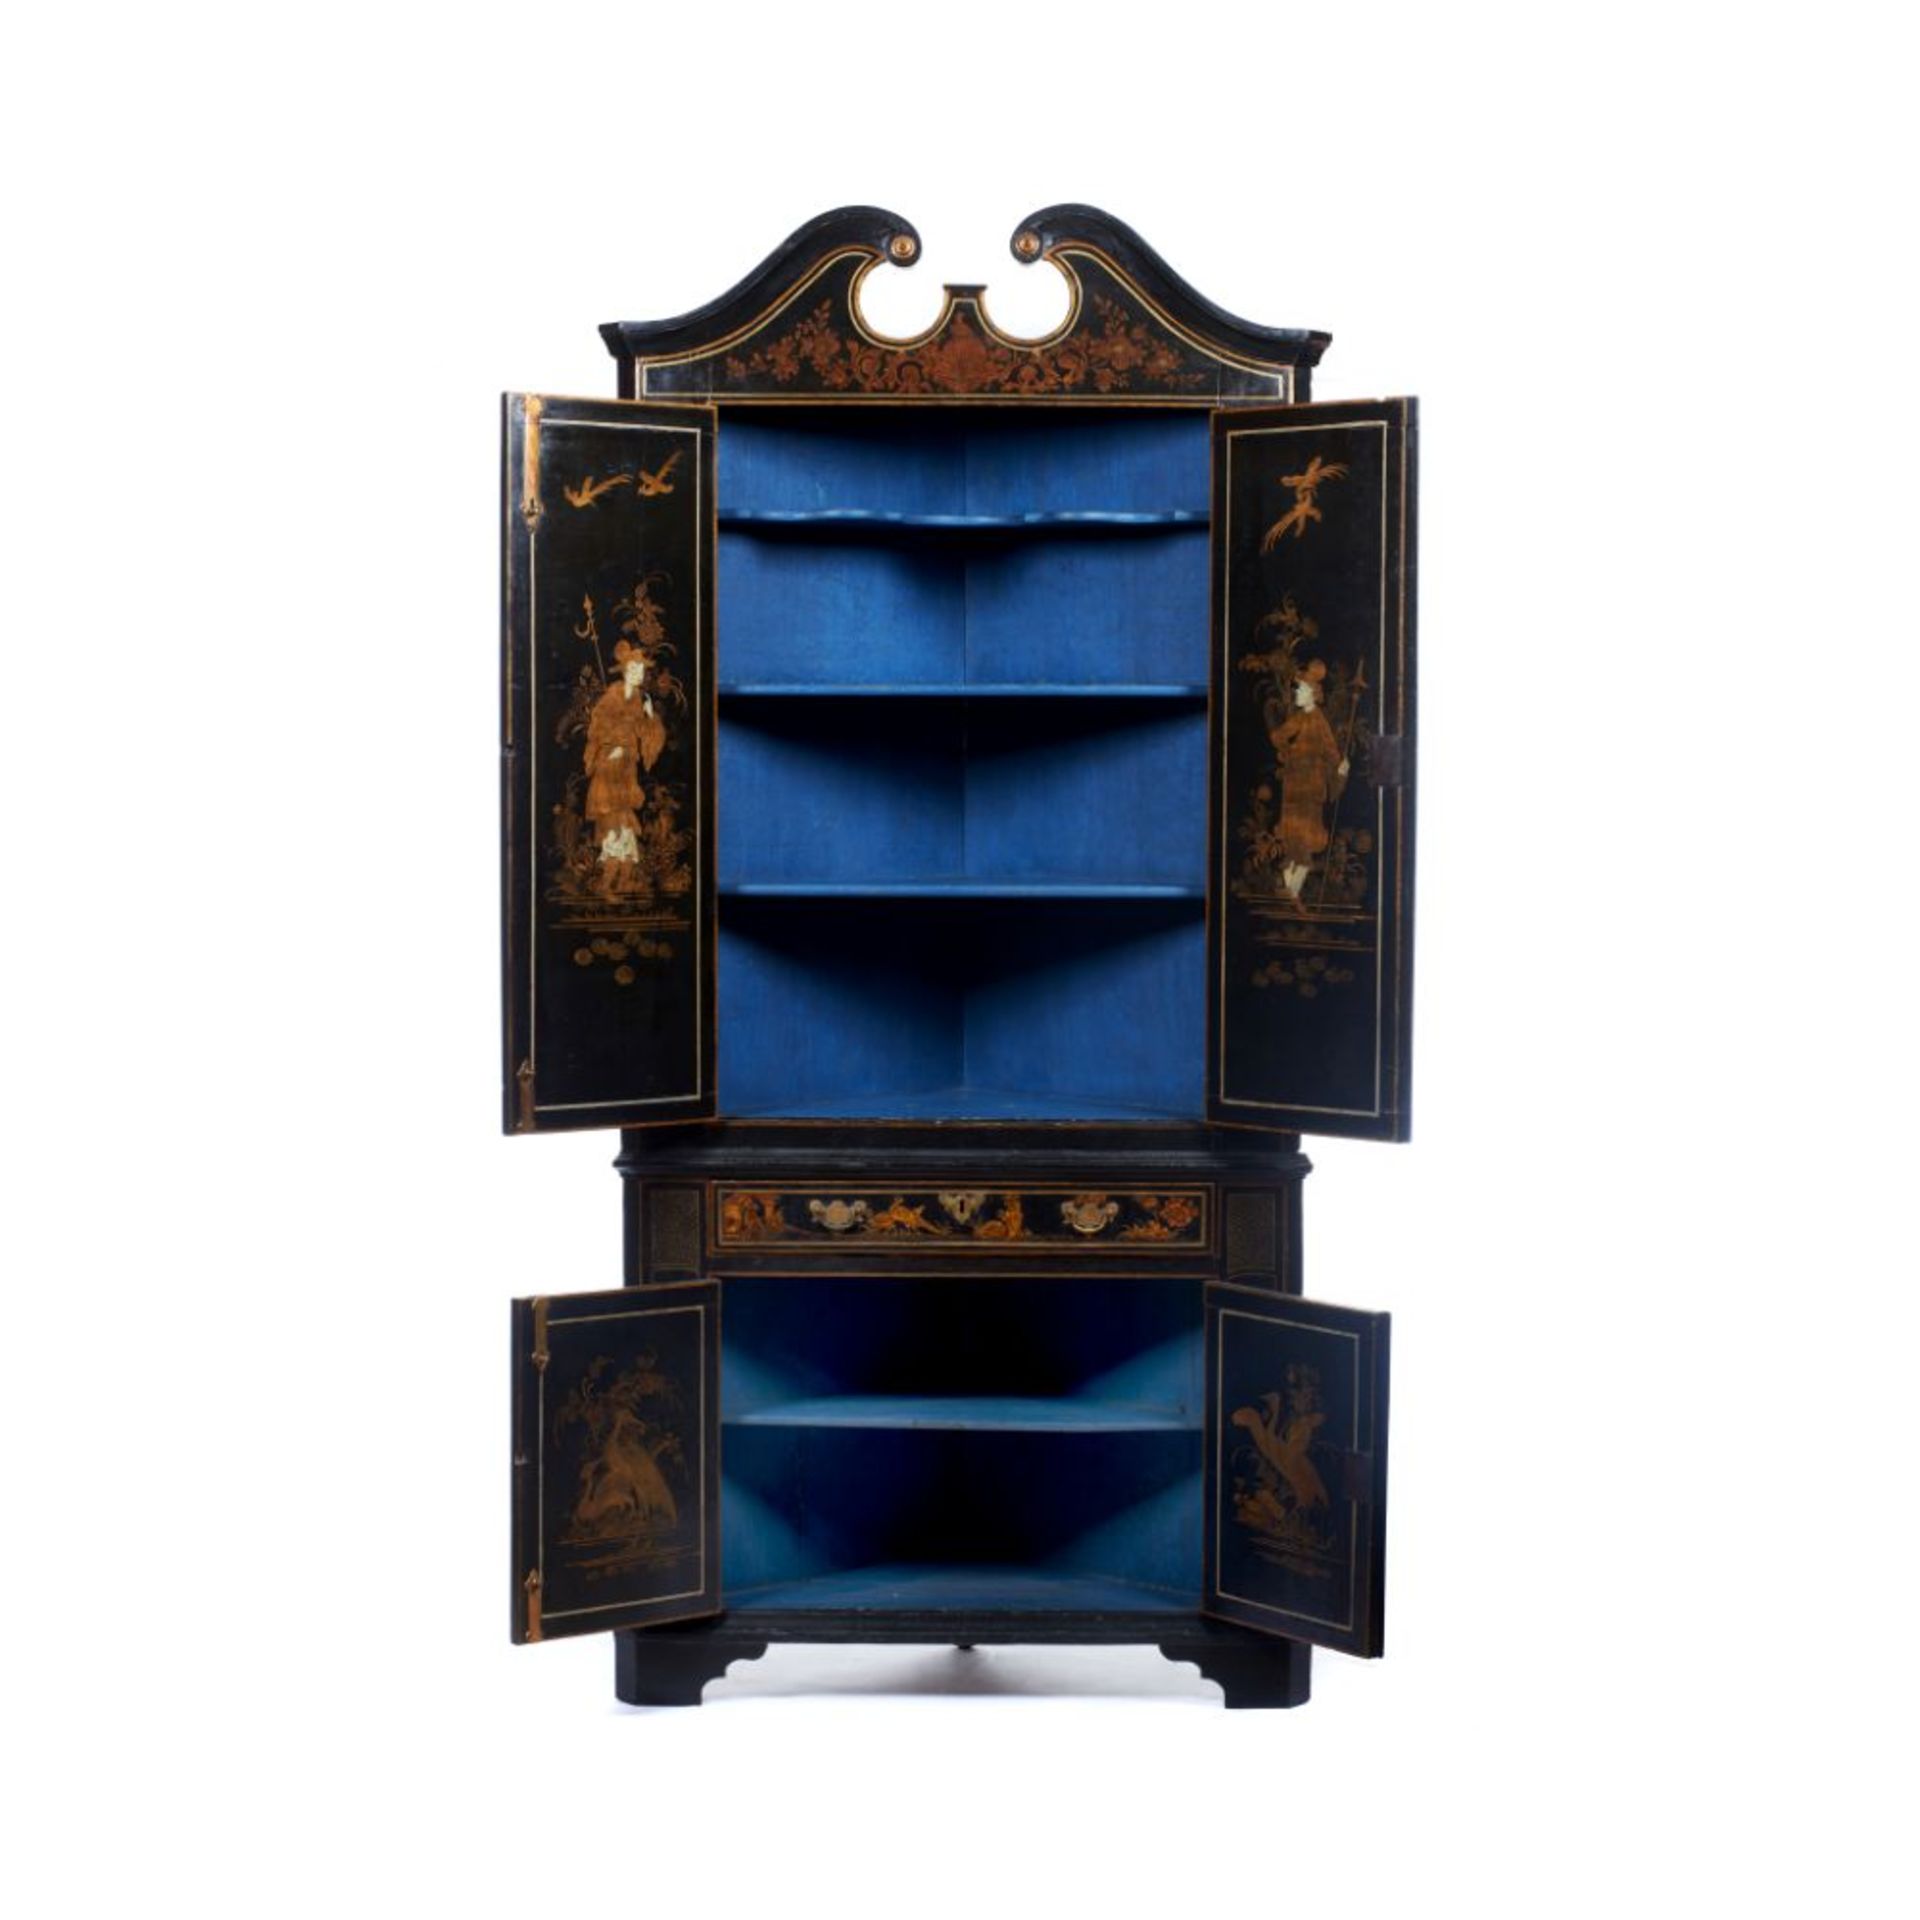 An unusual George III corner cabinet, Black lacquered wood, Red and brown oriental inspired - Image 2 of 3